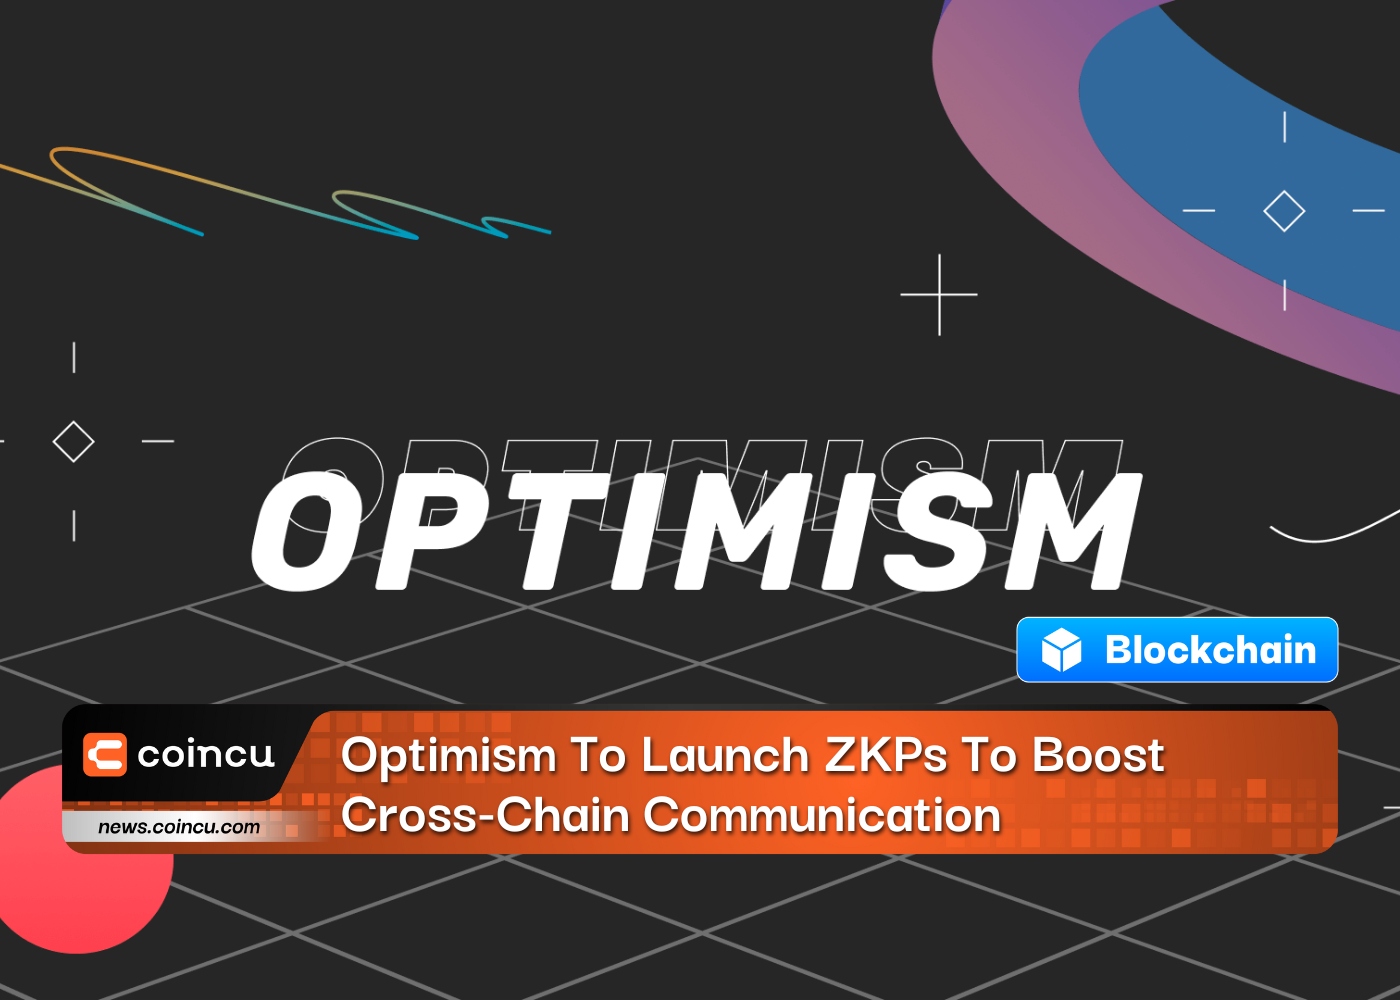 Optimism To Launch ZKPs To Boost Cross-Chain Communication